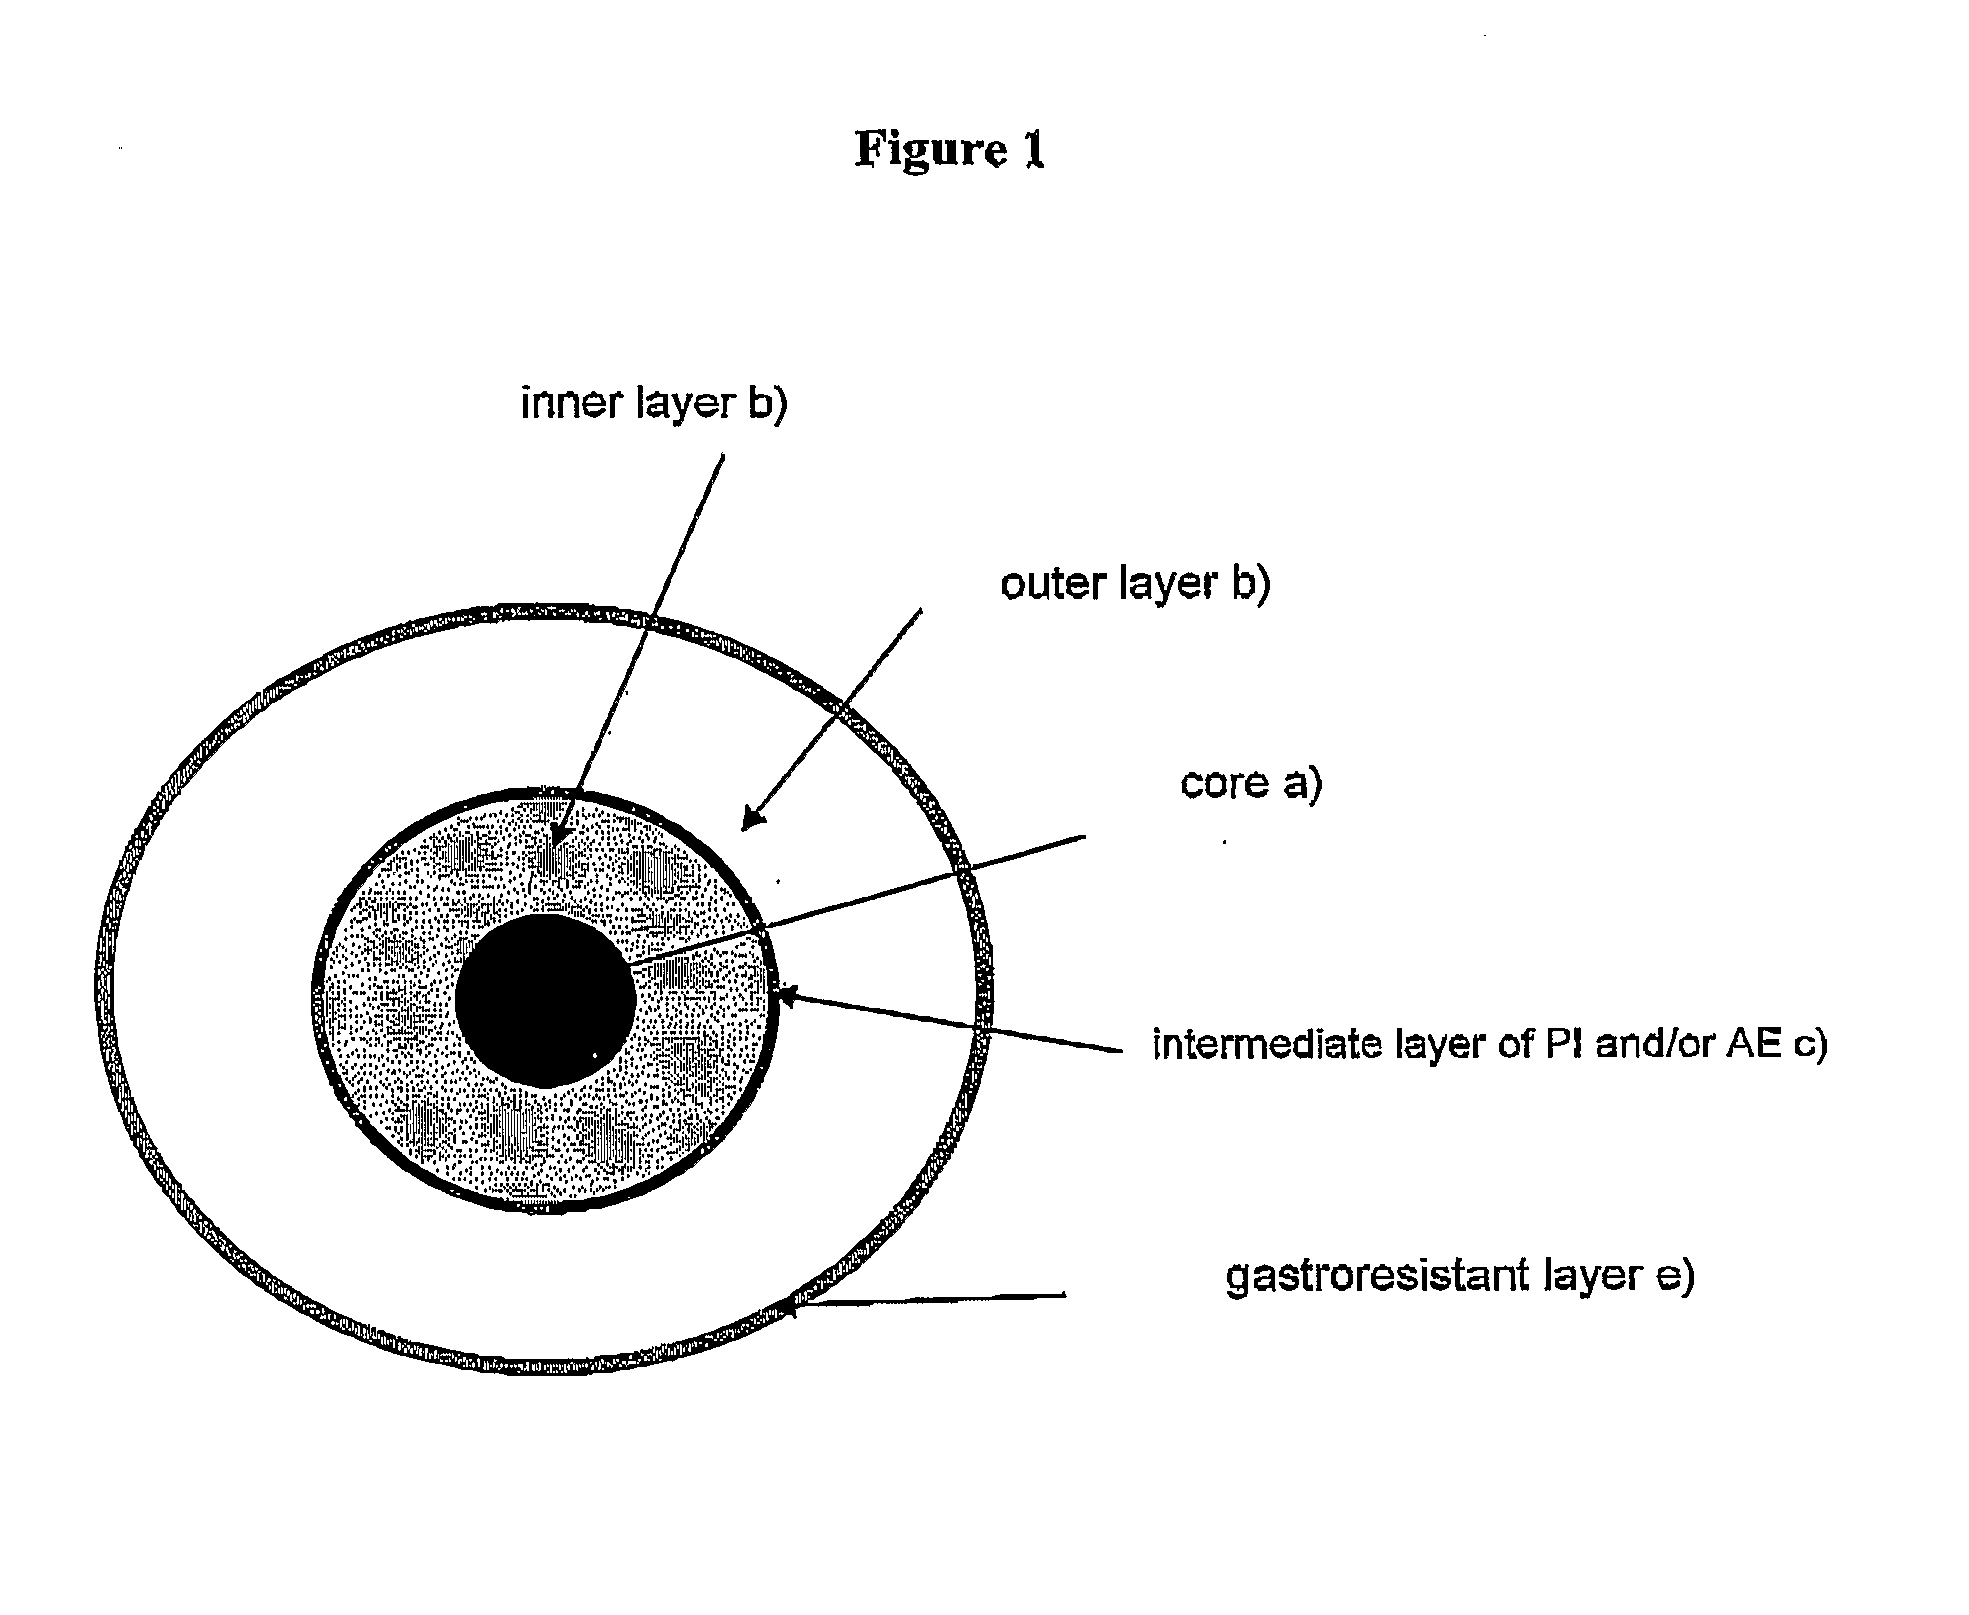 System for the colon delivery of drugs subject to enzyme degradation and/or poorly absorbed in the gastrointestinal tract